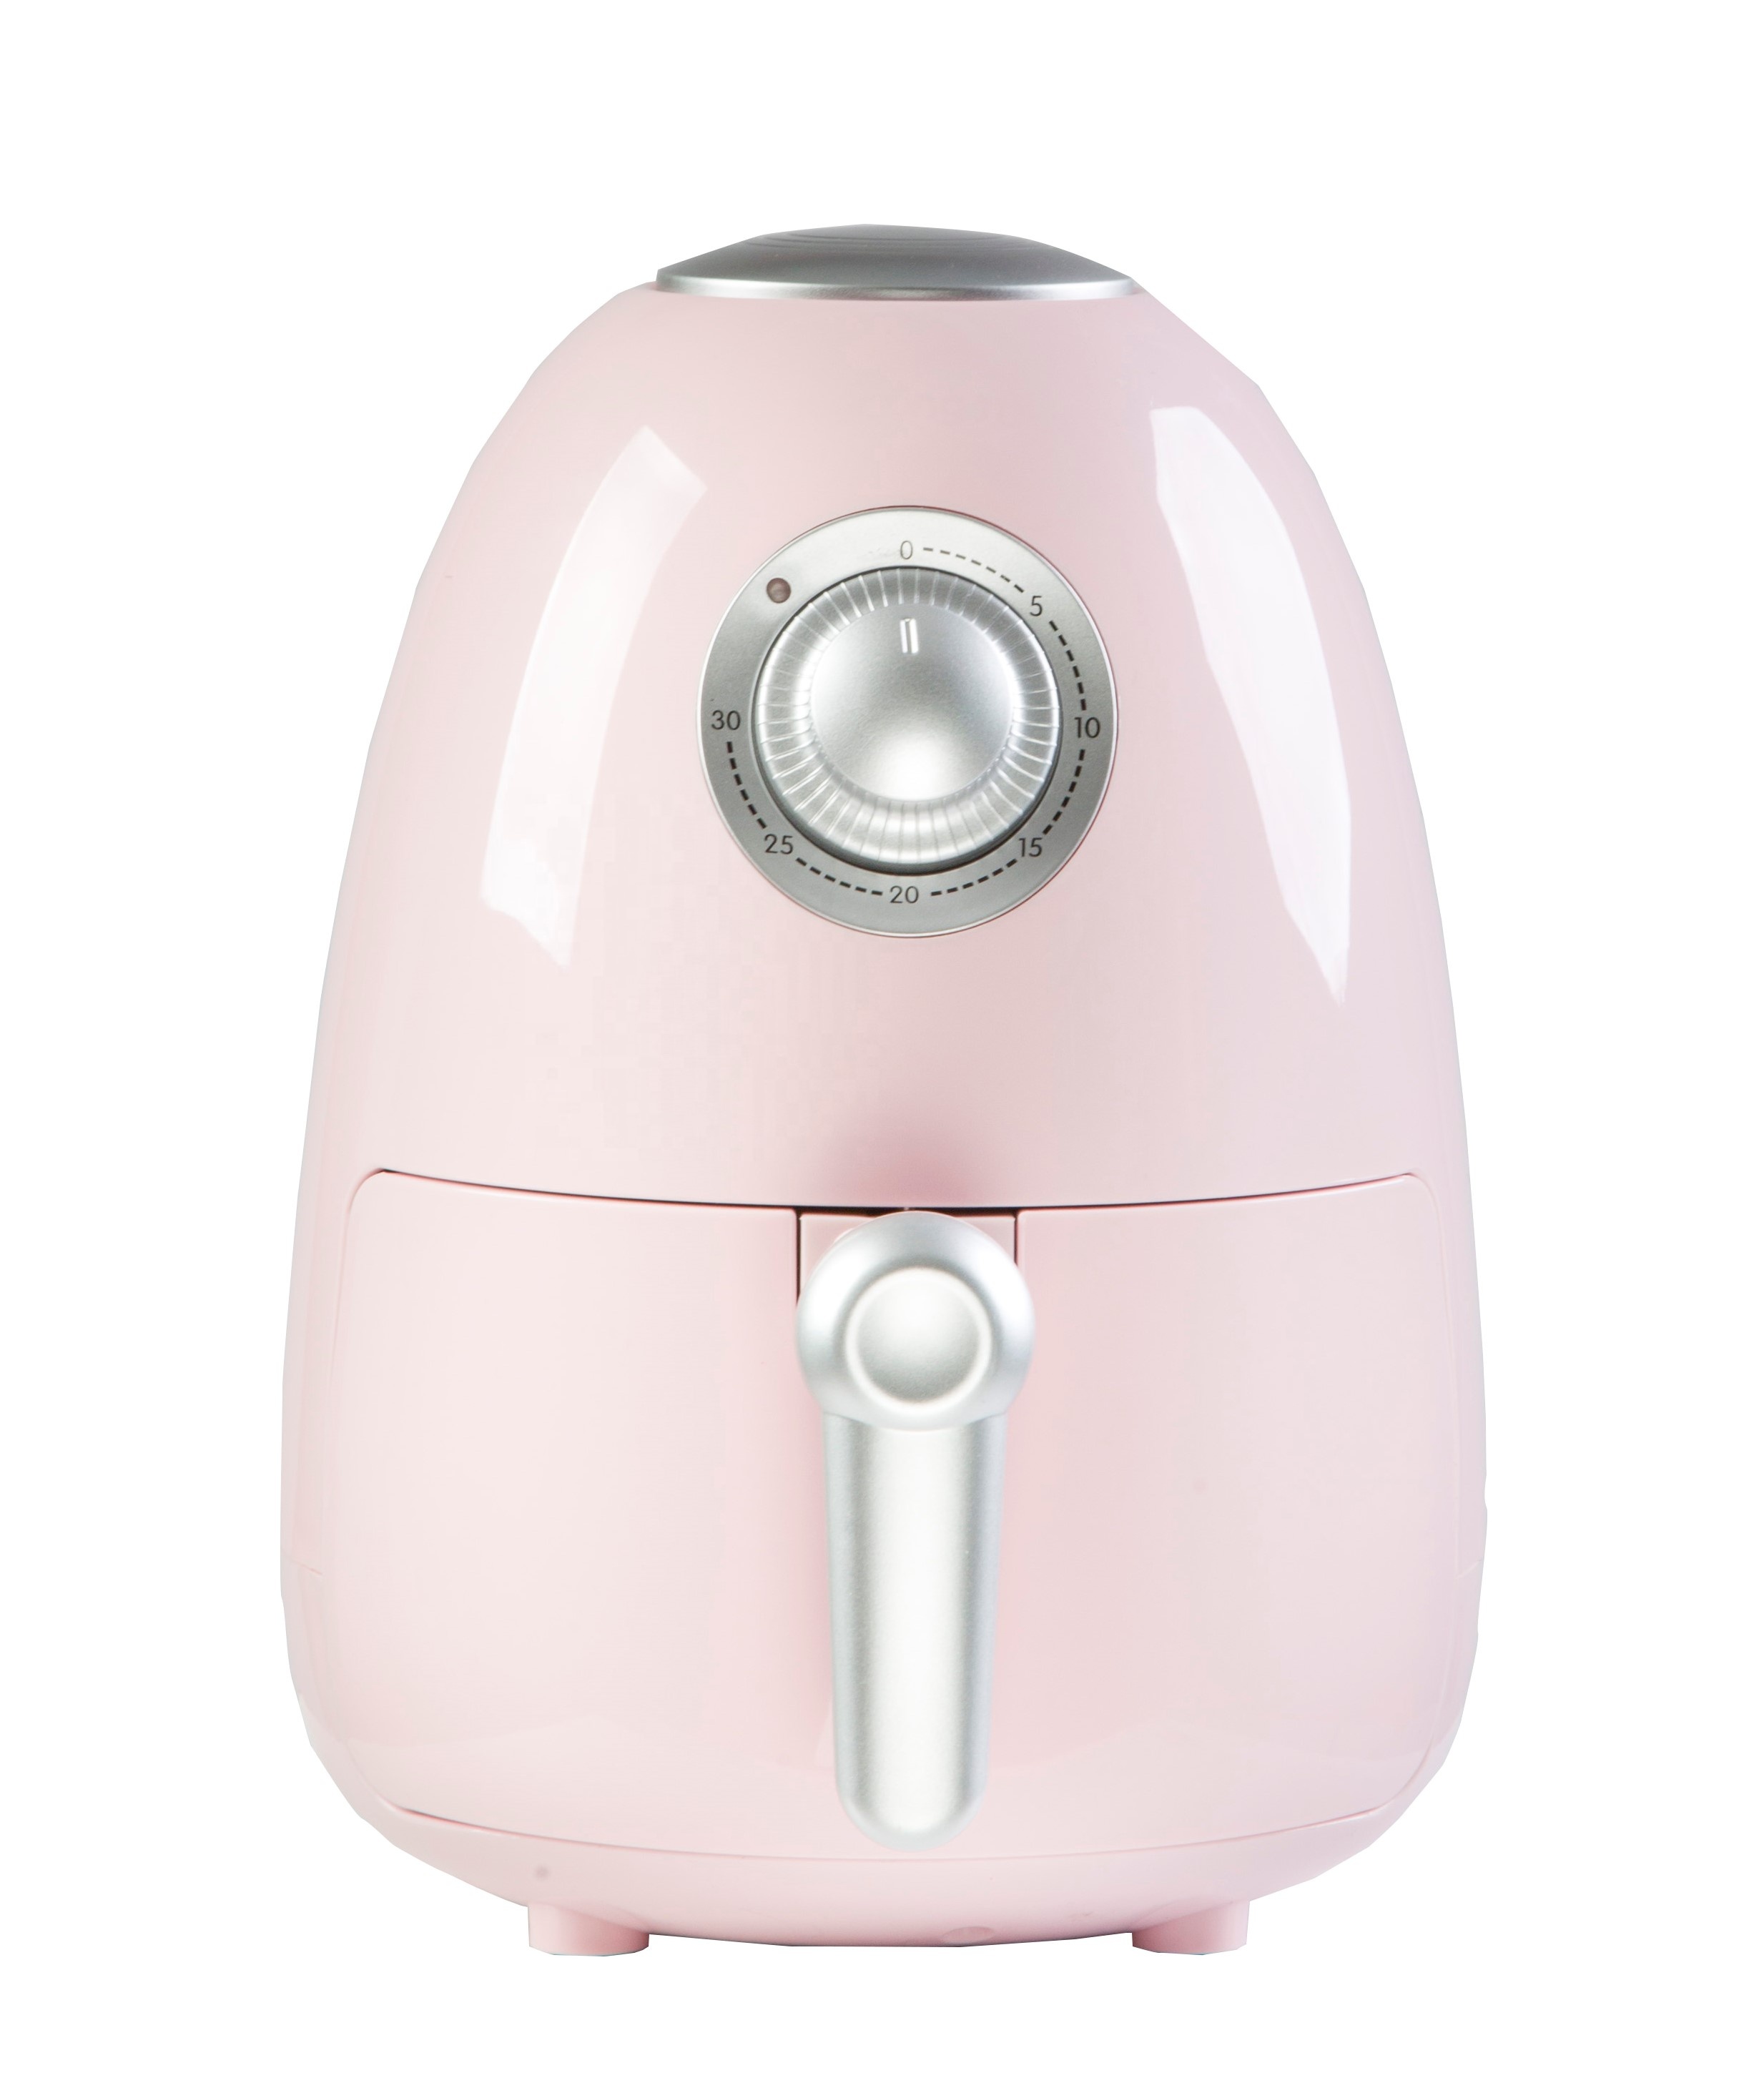 As Seen On TV Mini Air Fryer Oven